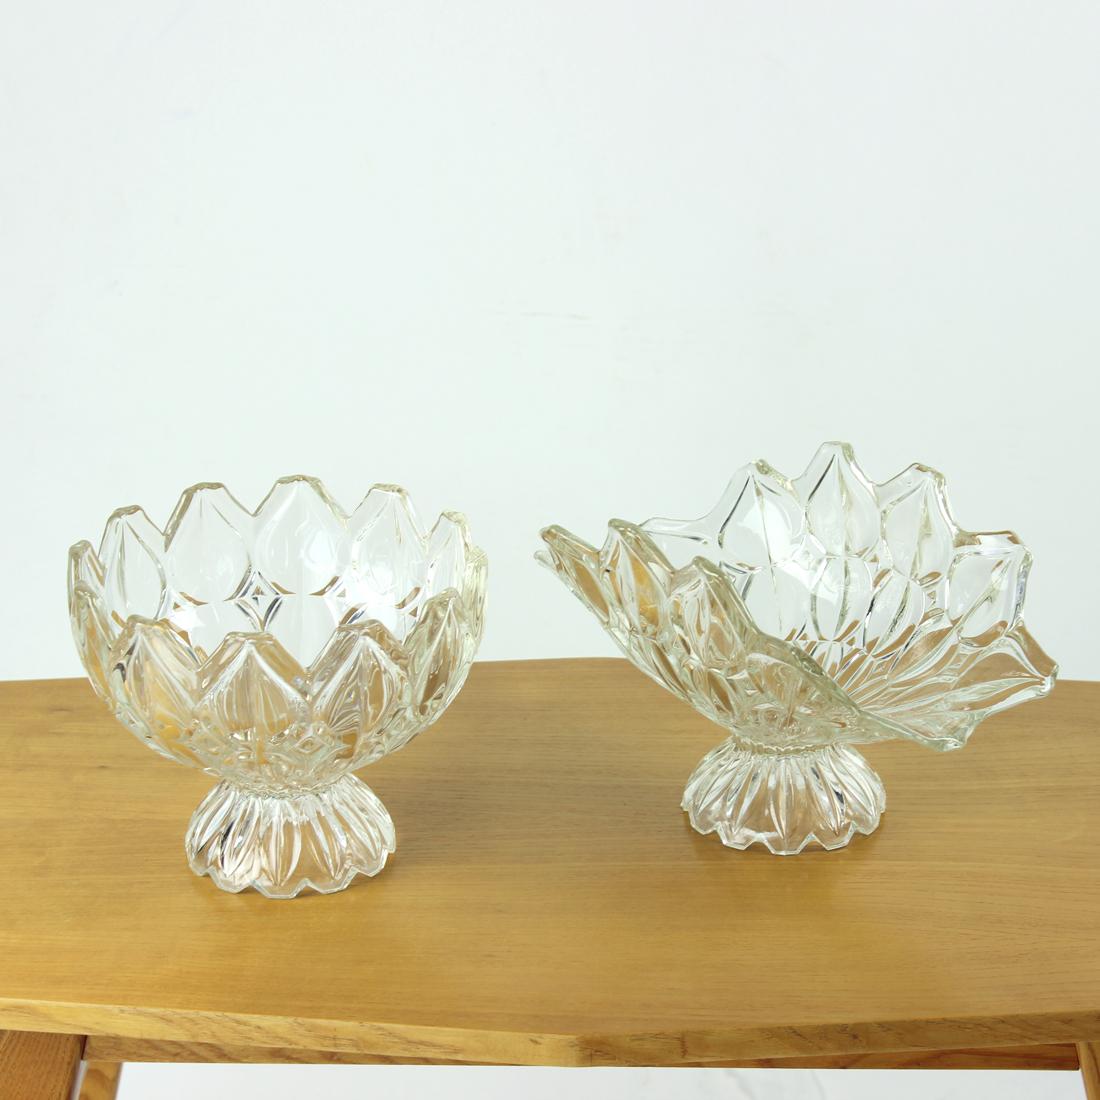 Large pressed glass bowl/basket in top condition. Produced in1957 as a part of Tulips collection by Hermanova Hut and designed by E. Downey, marked in the official catalogue as model 19992/210. The bowl is made out of tulip pettels made of clear